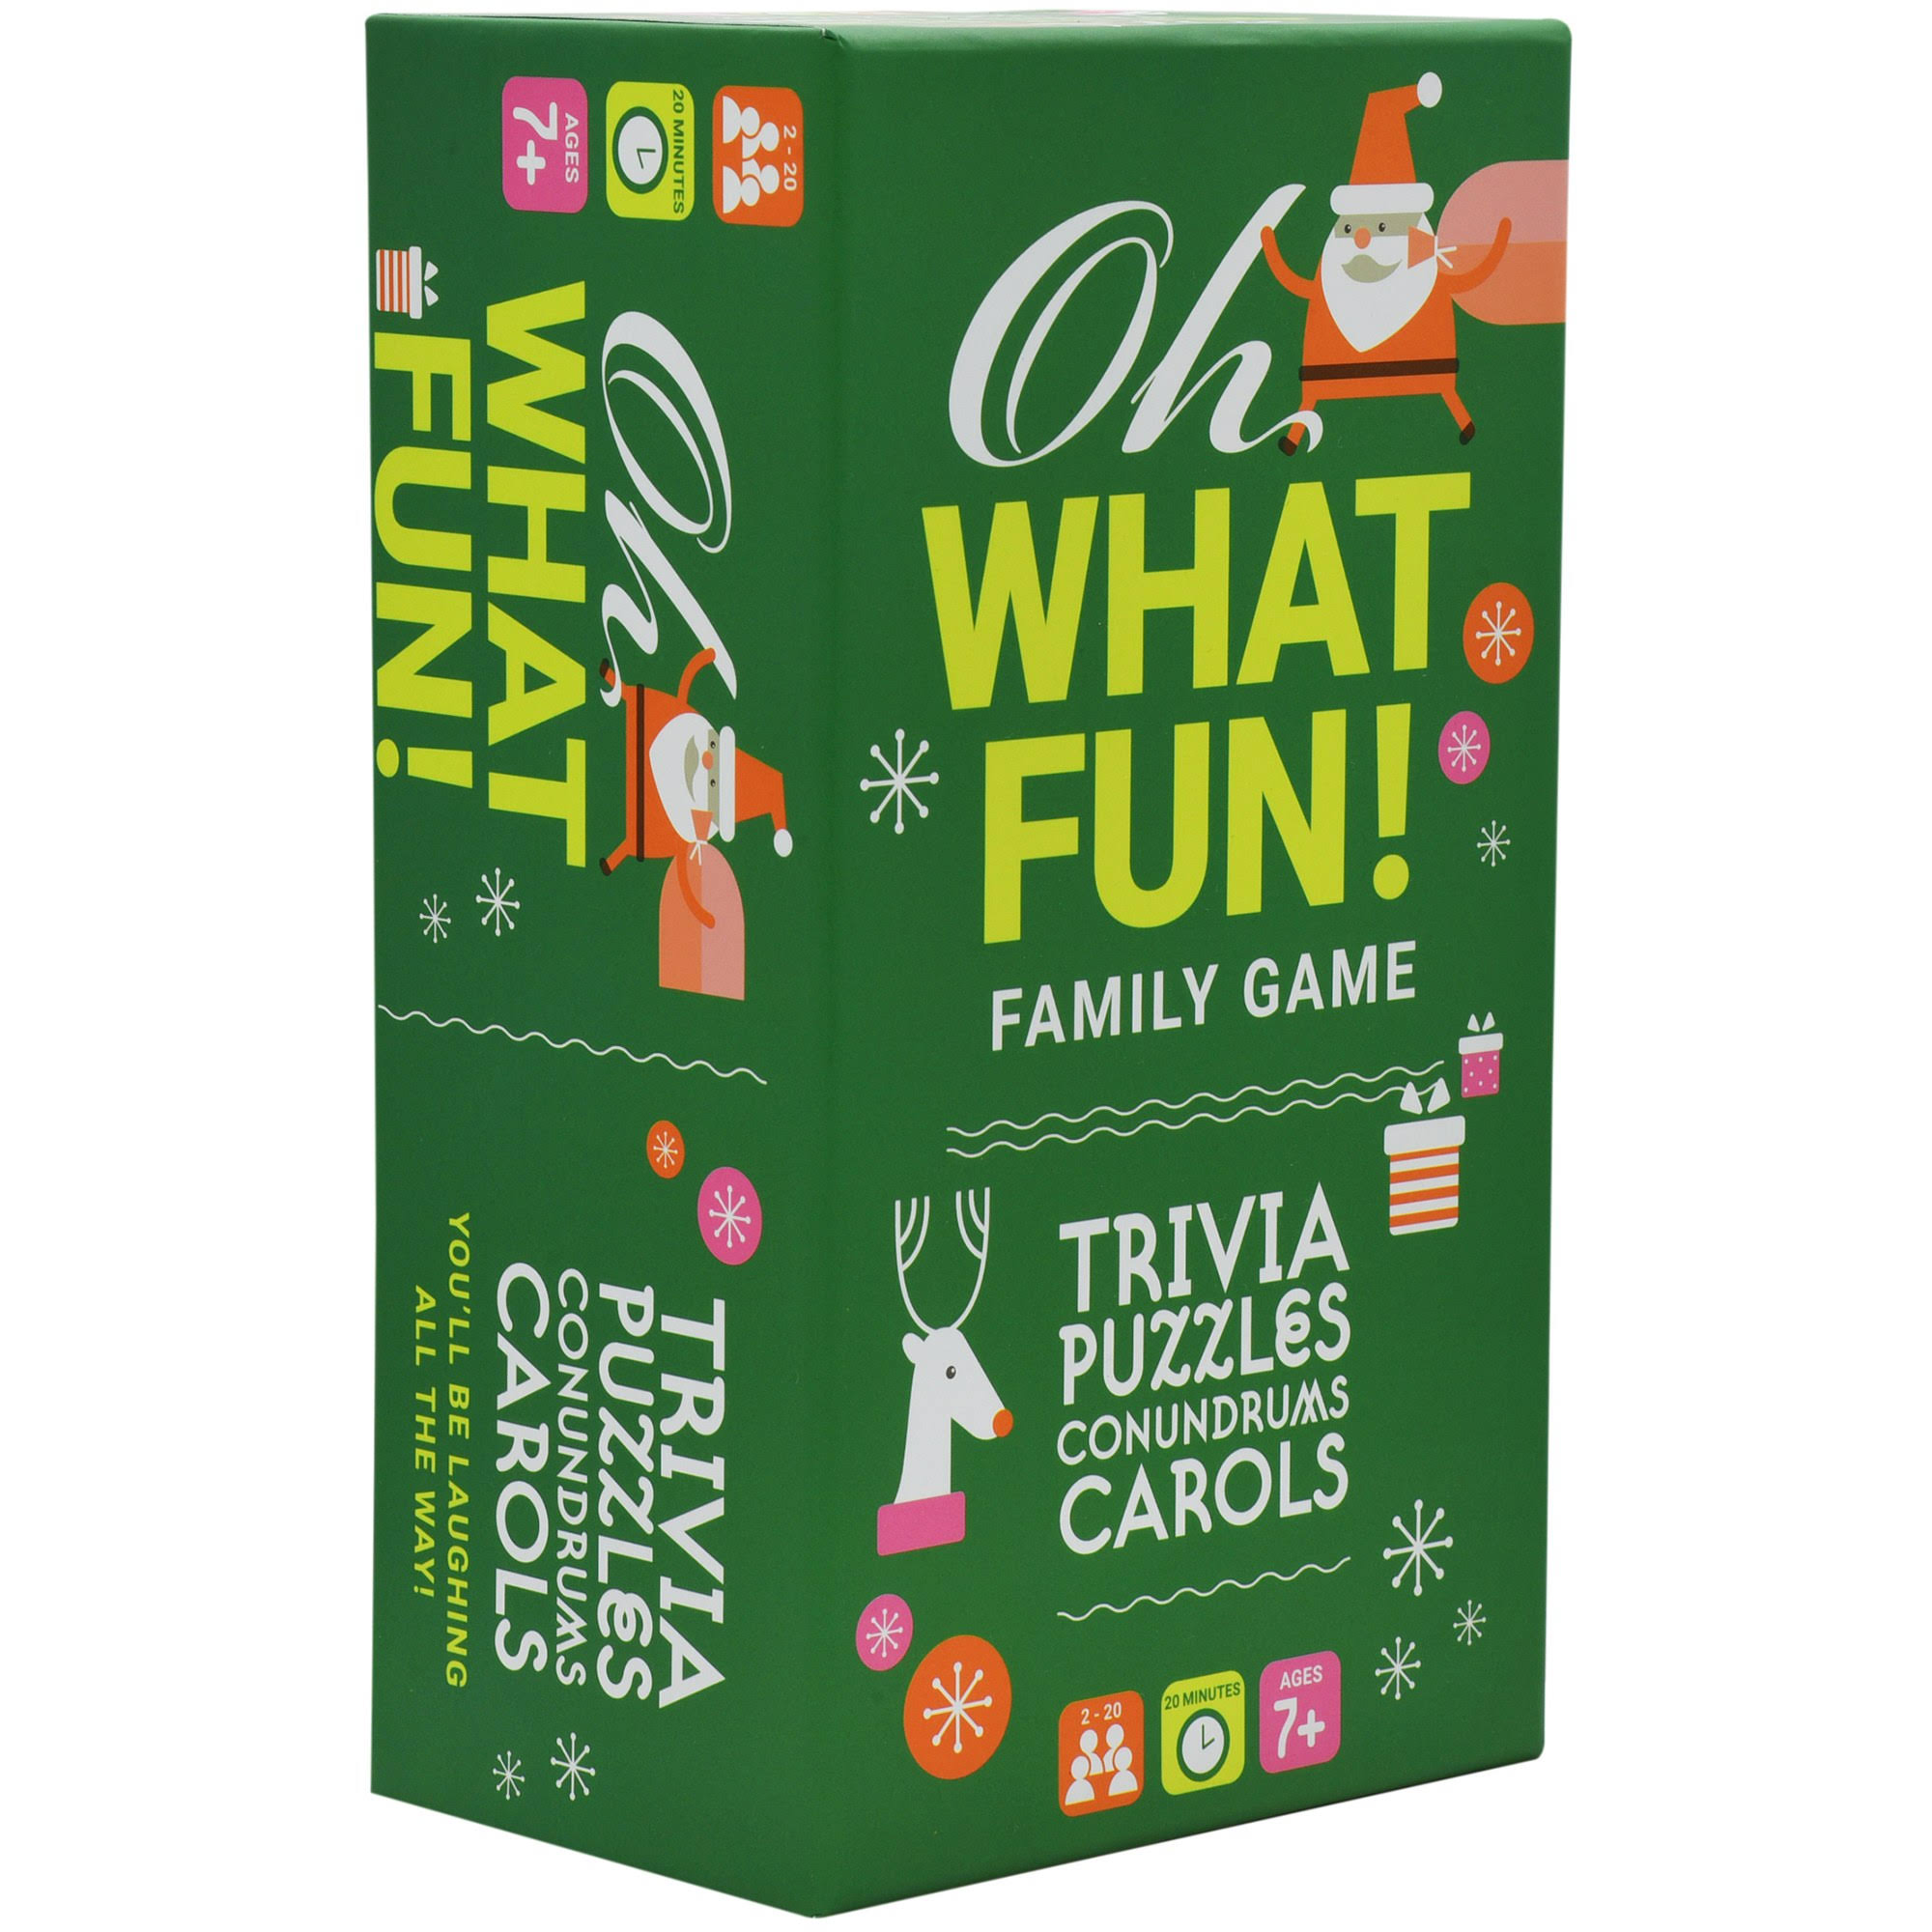 Oh What Fun! Family Game